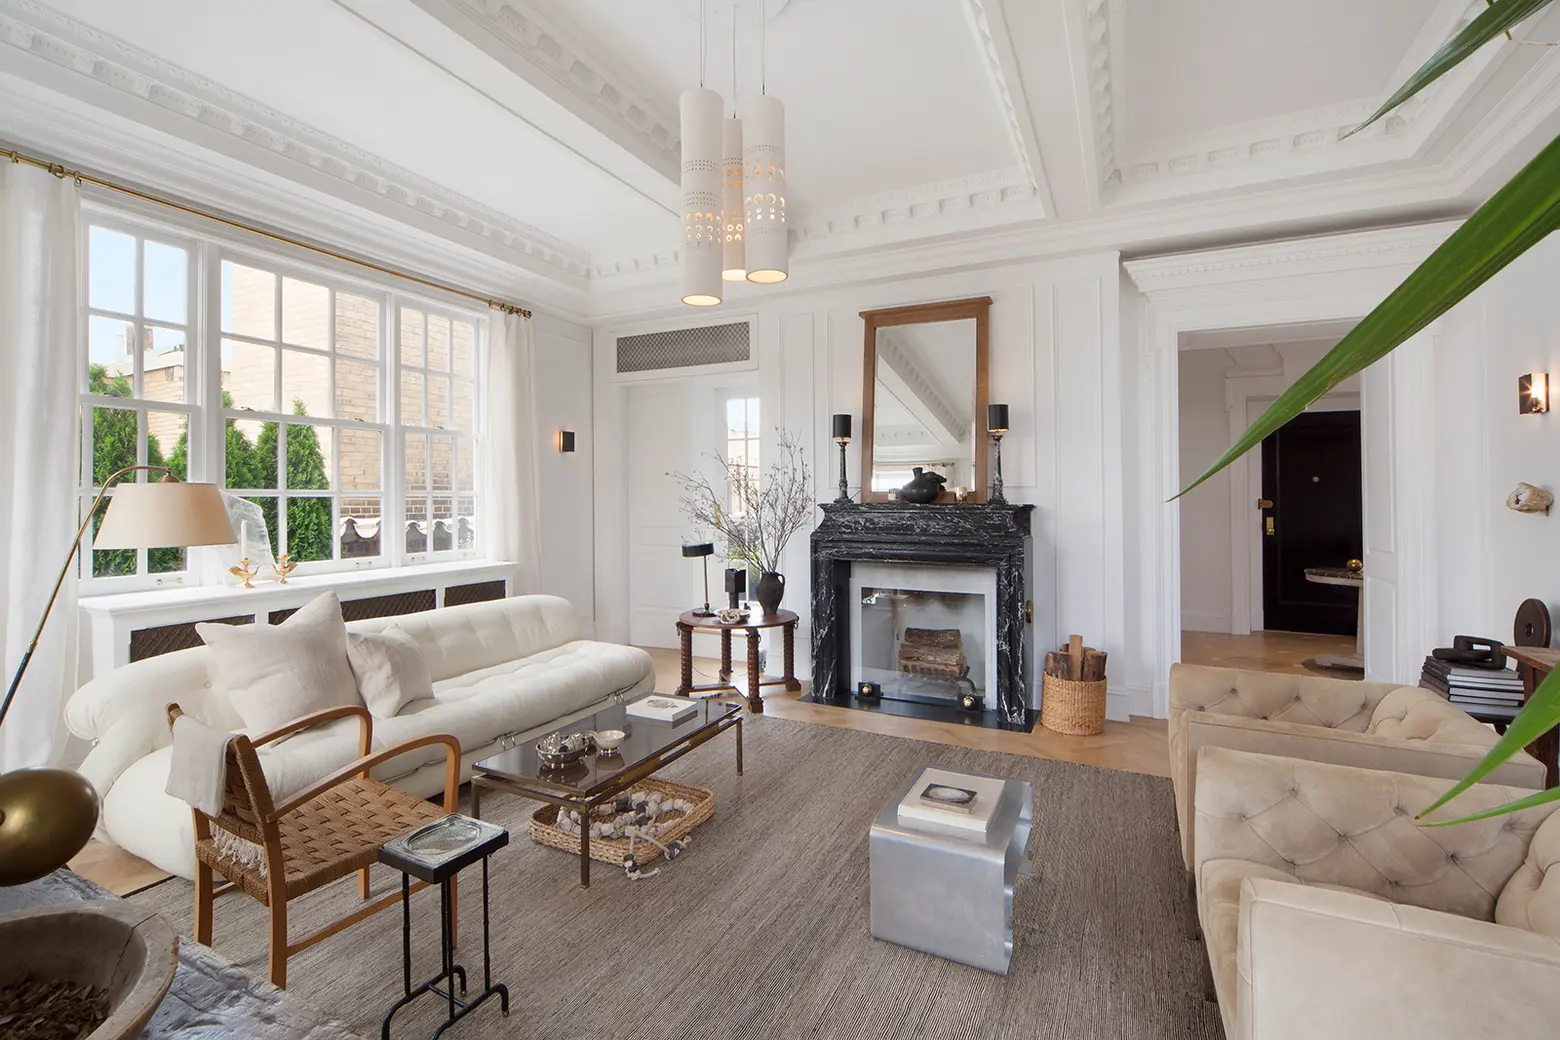 Nate Berkus and Jeremiah Brent List Their Greenwich Village Penthouse for $10.5M